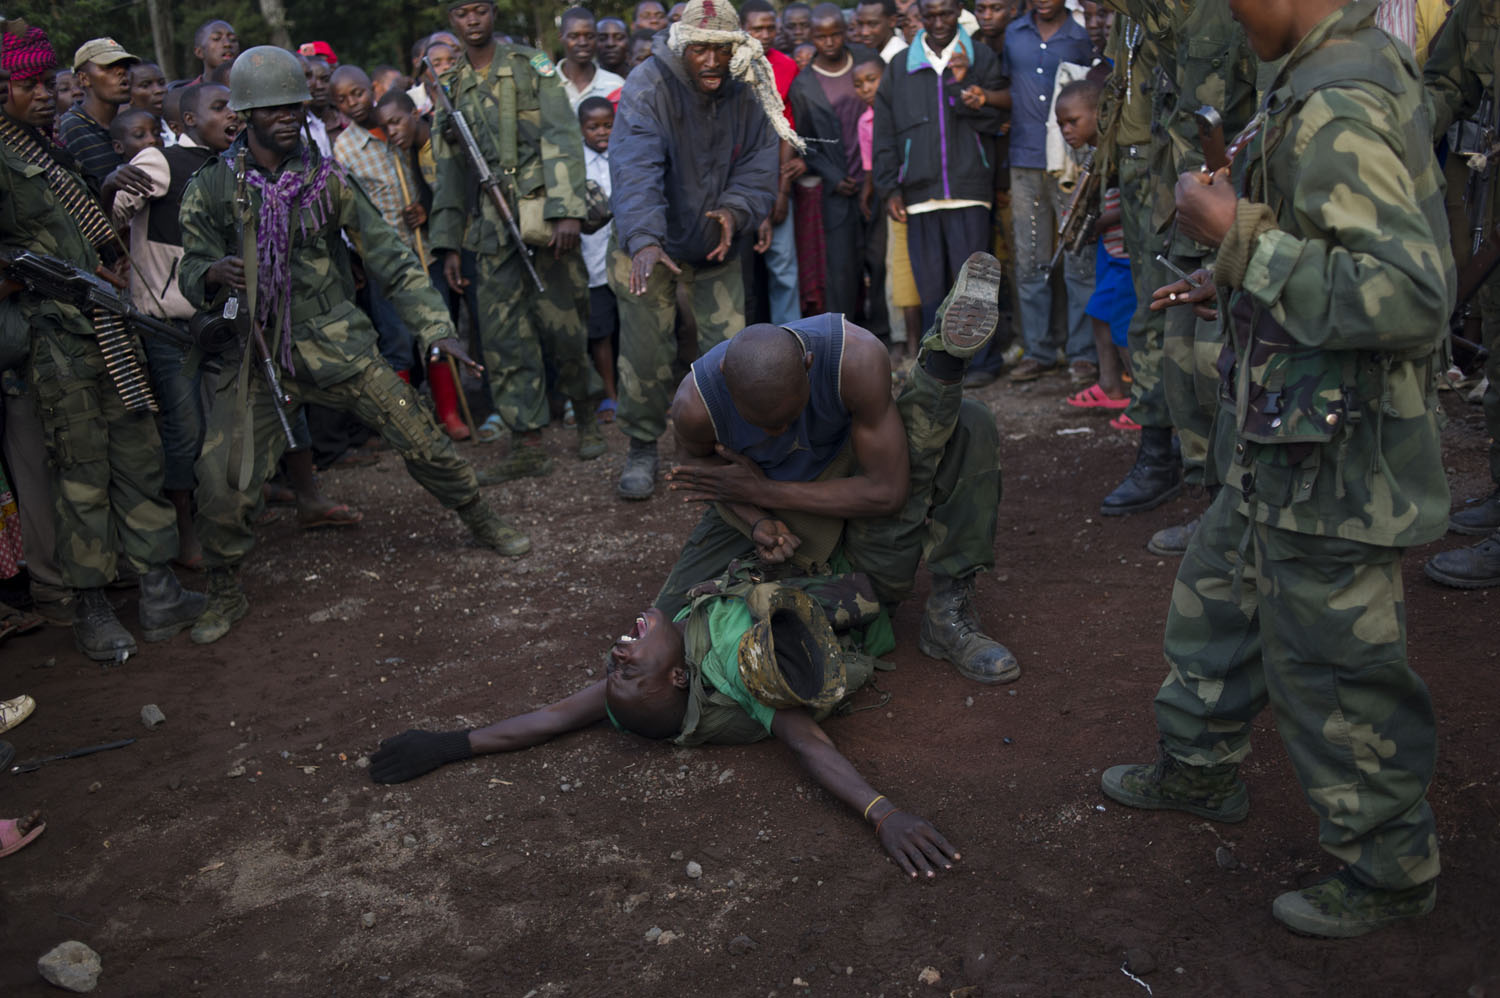 Congolese army soldiers, part of a Chinese trained commando group, celebrate with a karate demonstration following the capture of the town of Bunagana from M23 rebels in the east of the Democratic Republic of the Congo on October 30, 2013. The army took the major border town just an hour earlier, representing a major blow to the rebels.